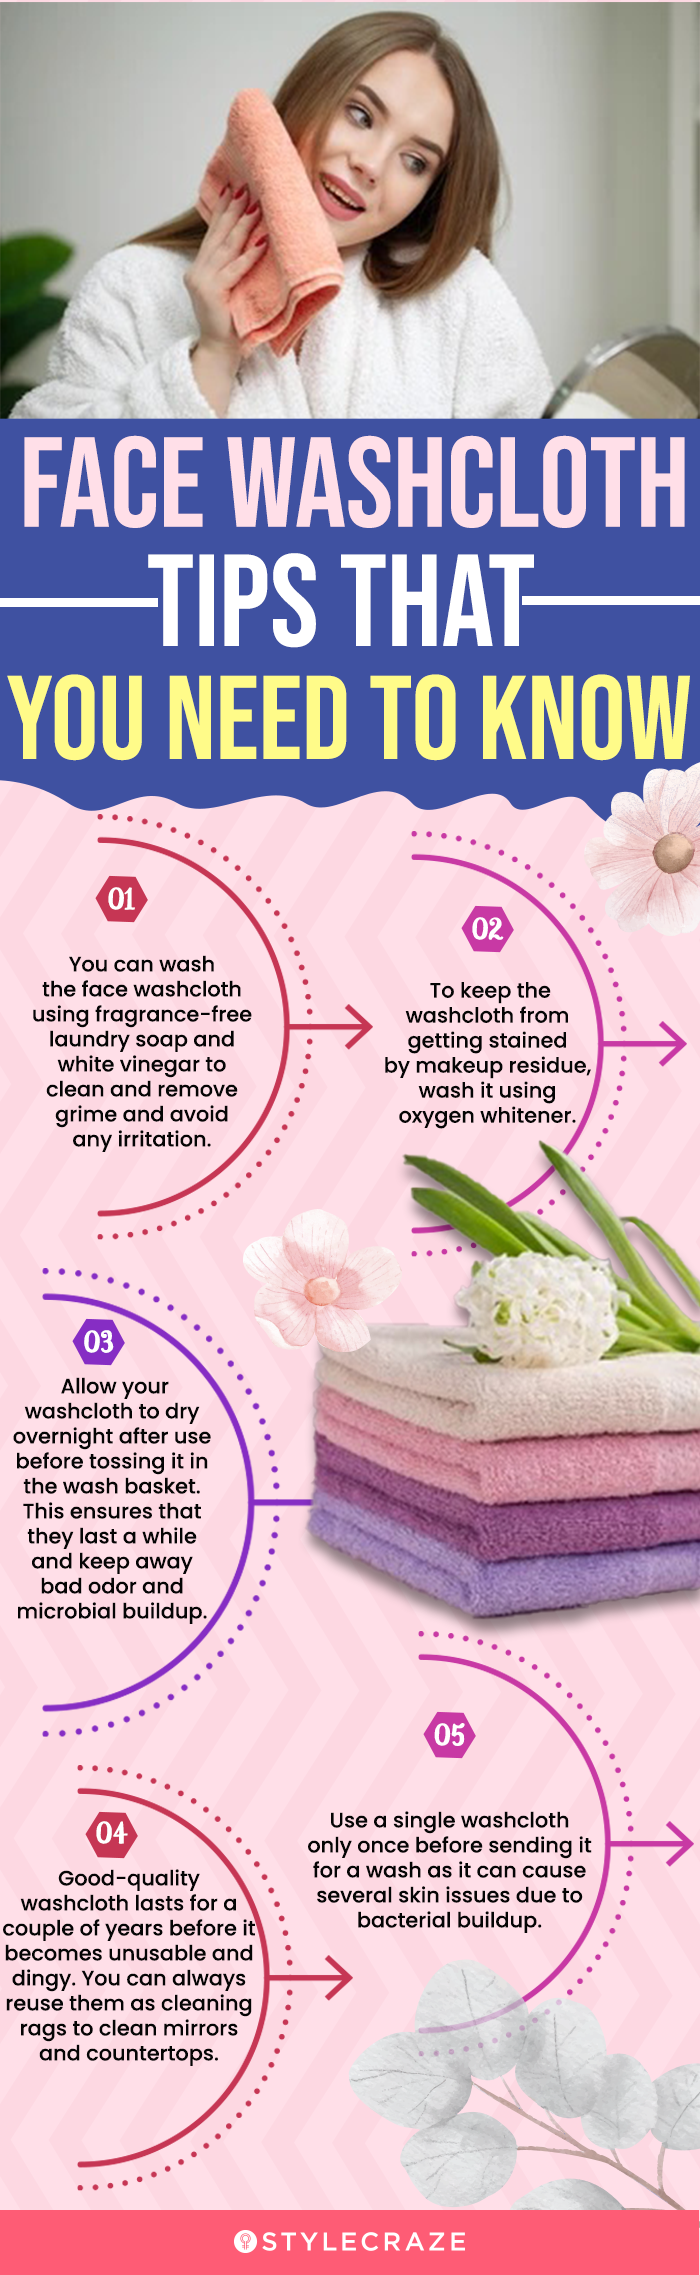  Face Washcloth Tips That You Need To Know(infographic)